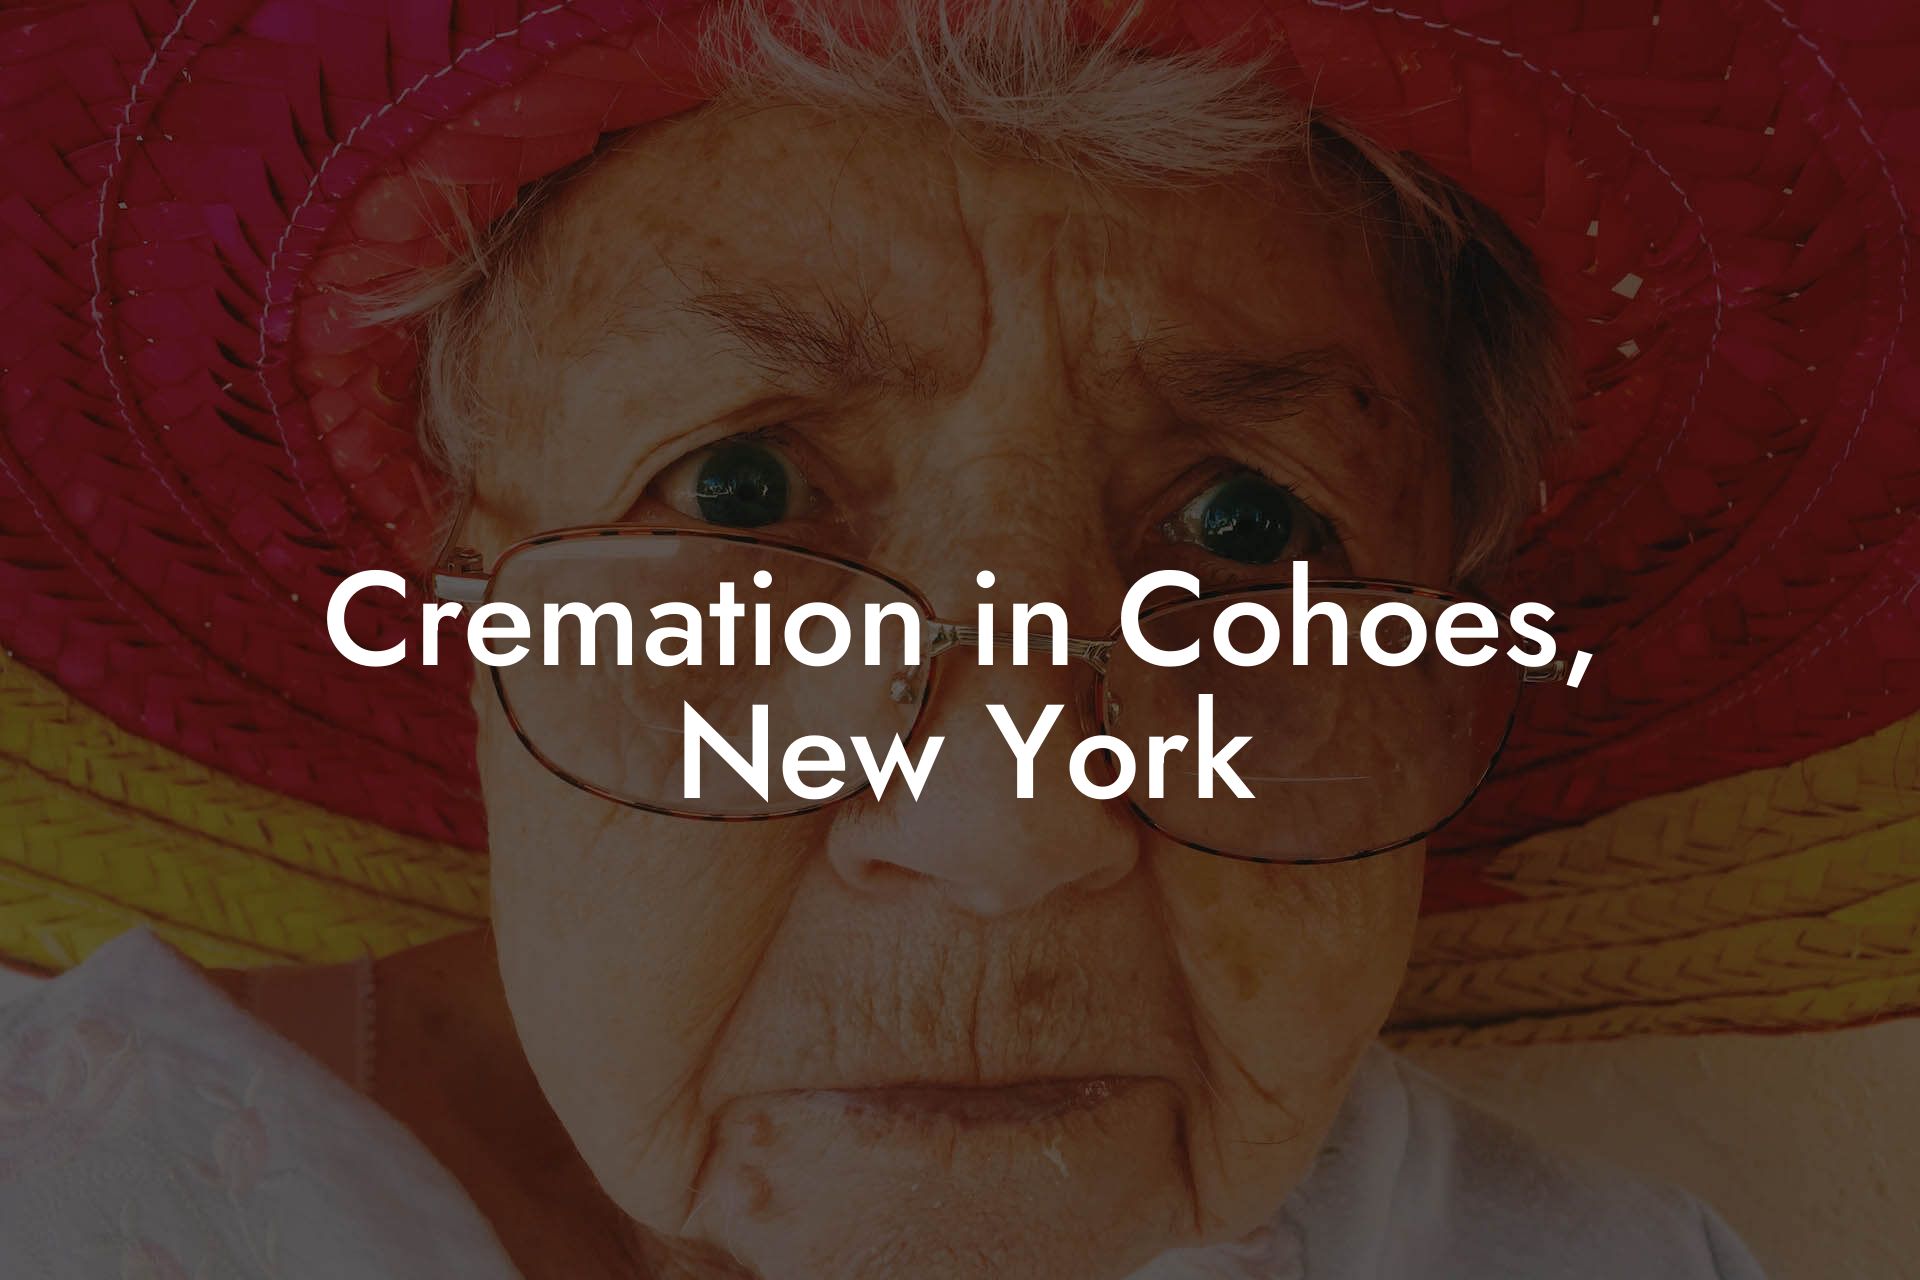 Cremation in Cohoes, New York